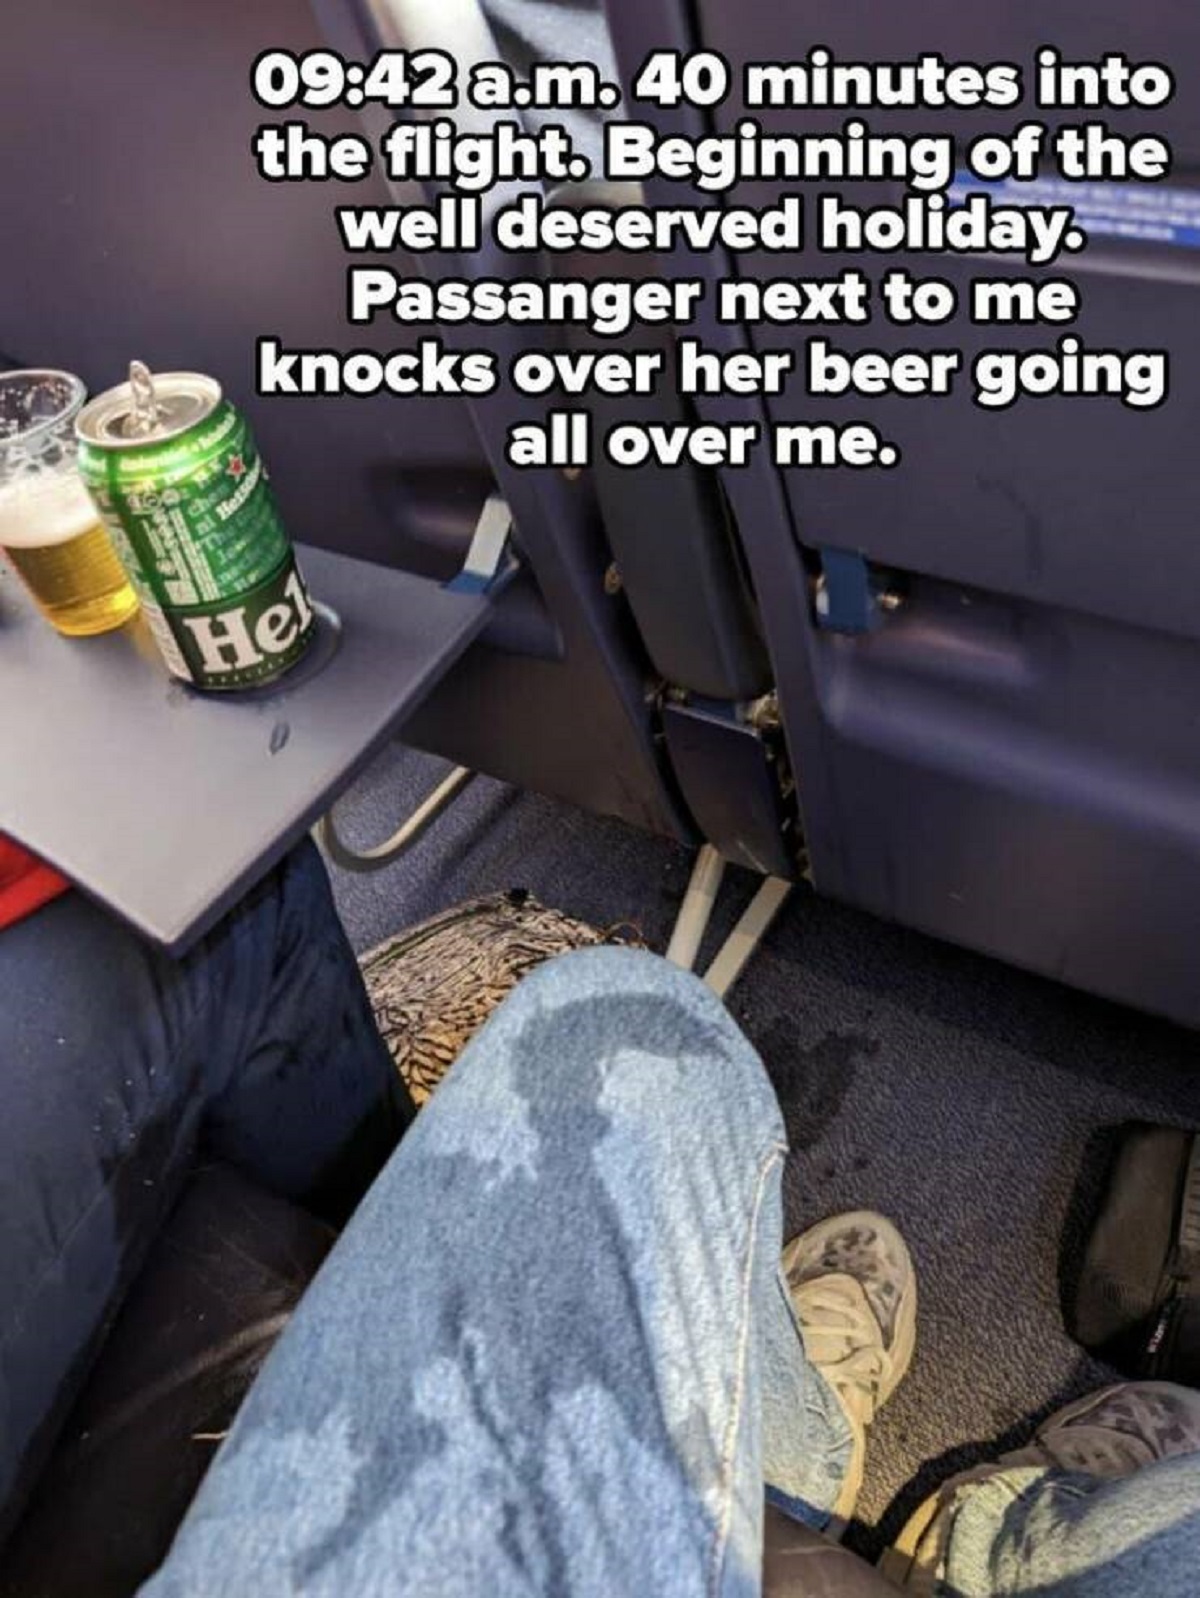 canada dry - He a.m. 40 minutes into the flight. Beginning of the well deserved holiday. Passanger next to me knocks over her beer going all over me.